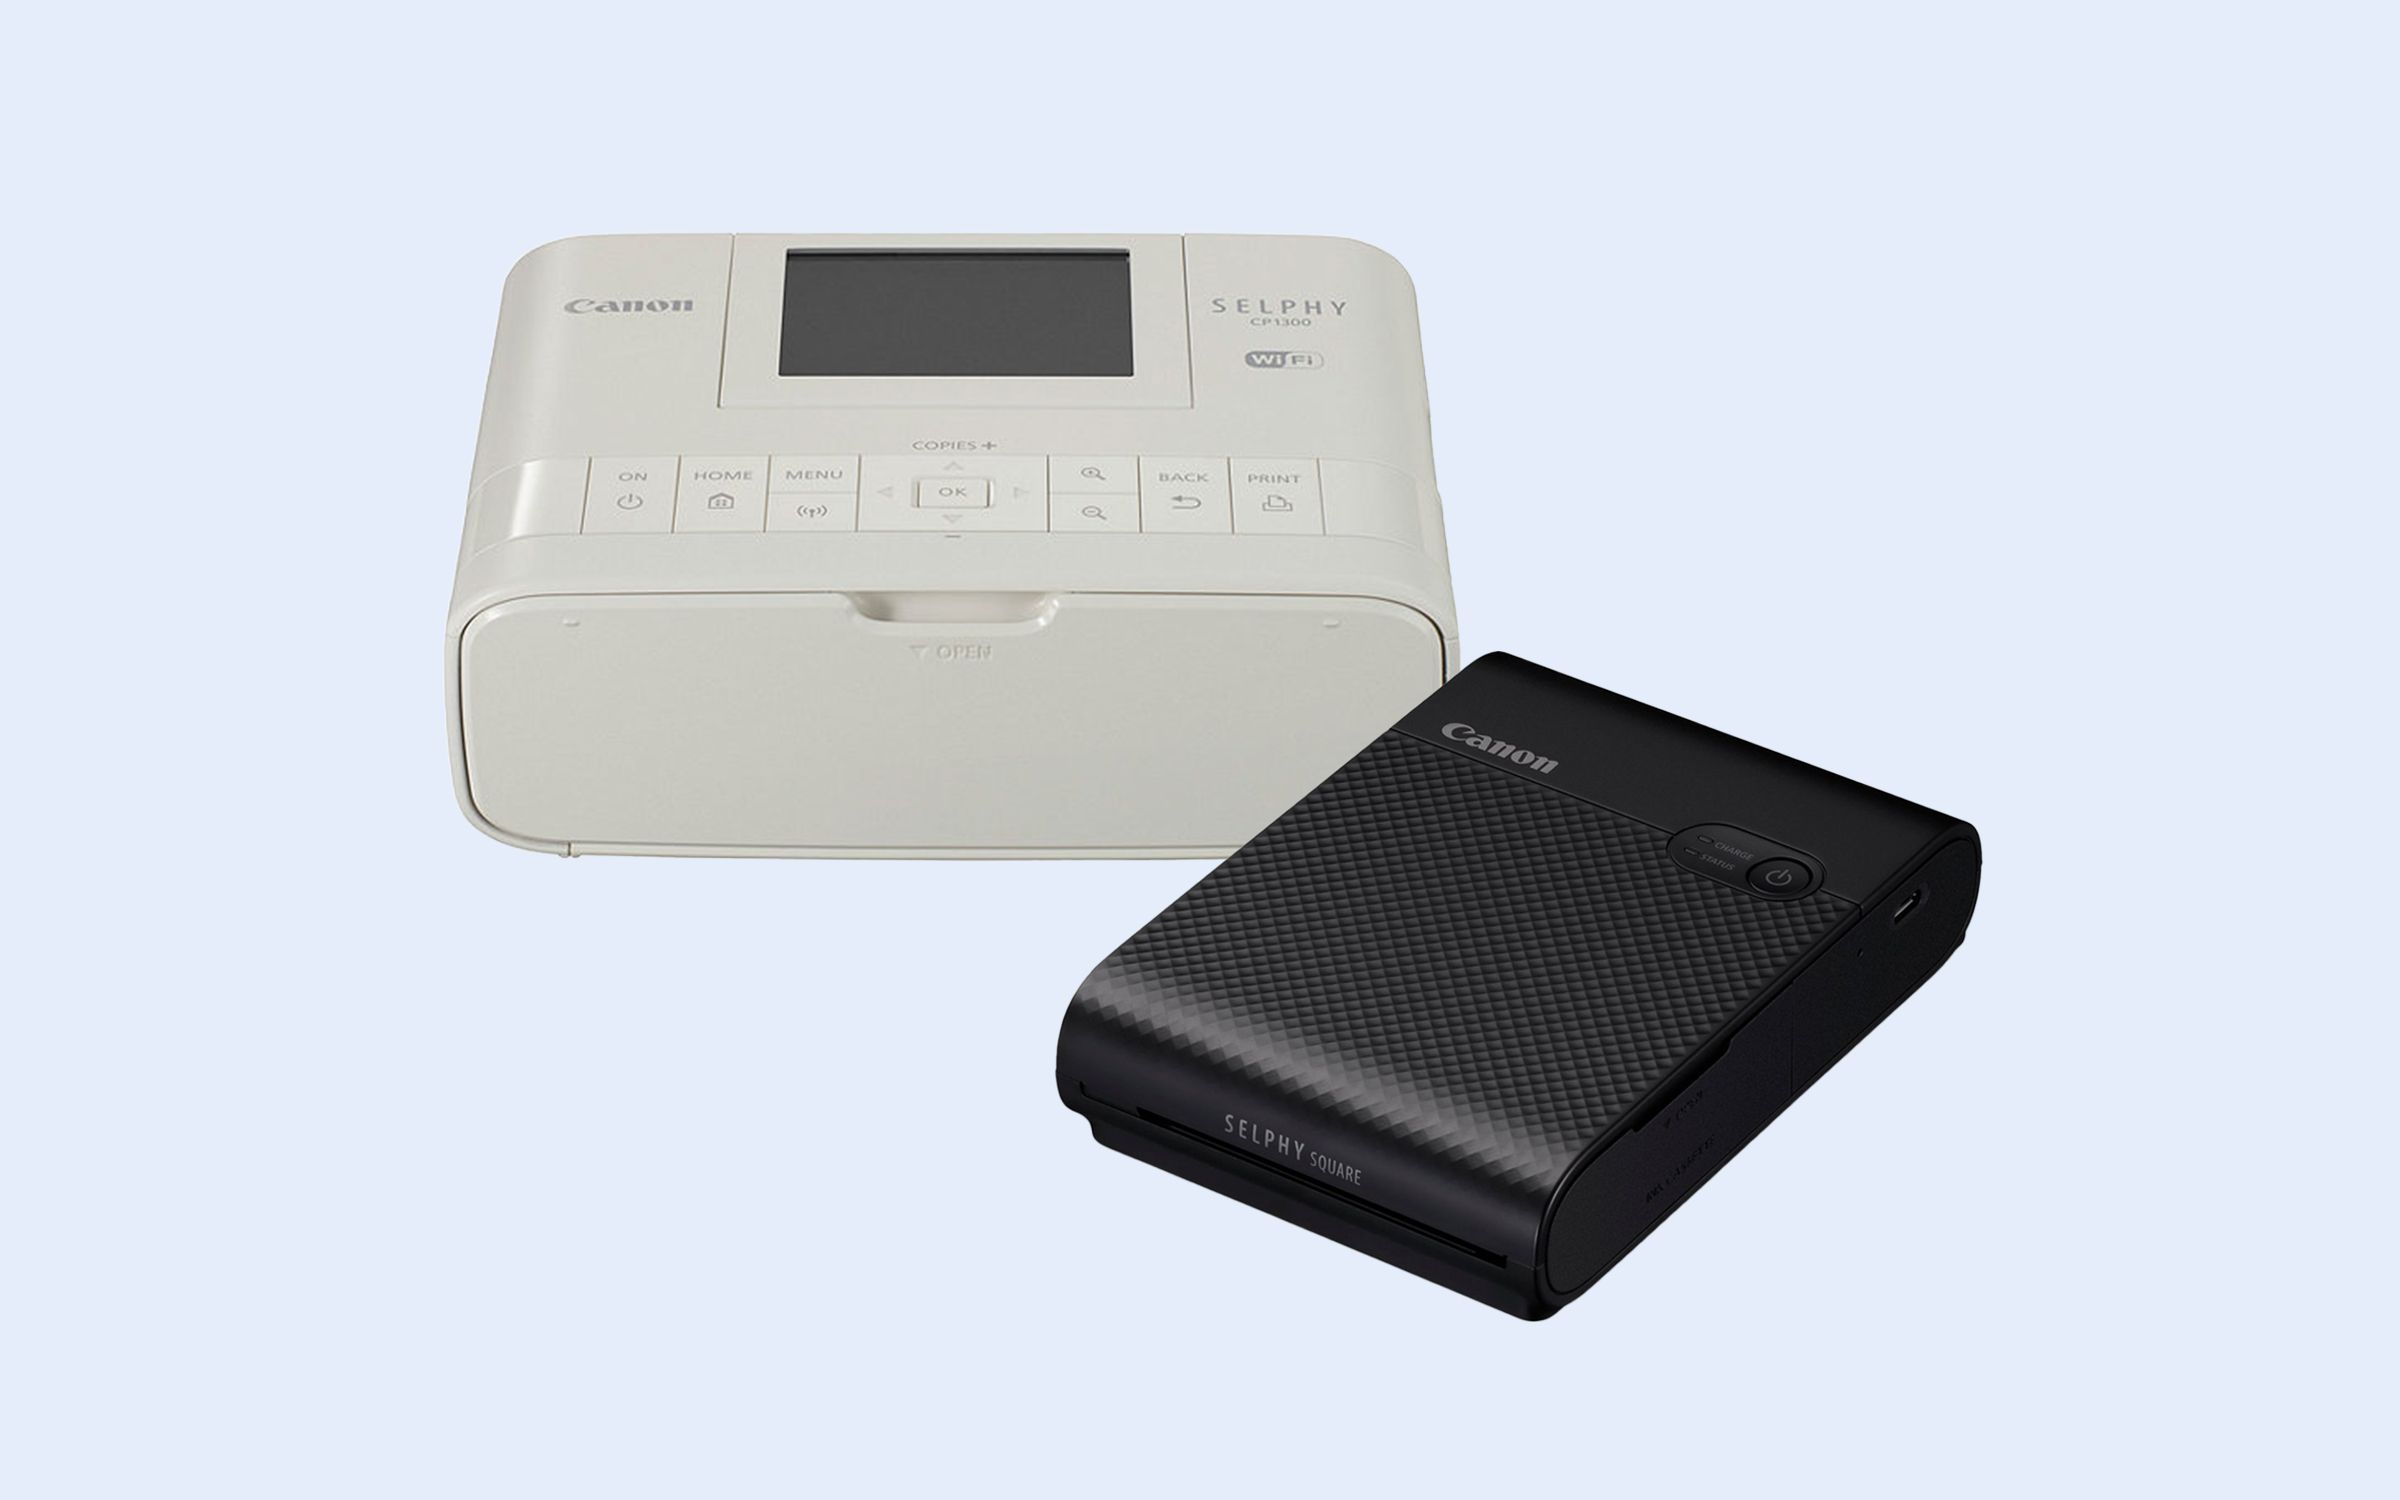 Canon SELPHY printers